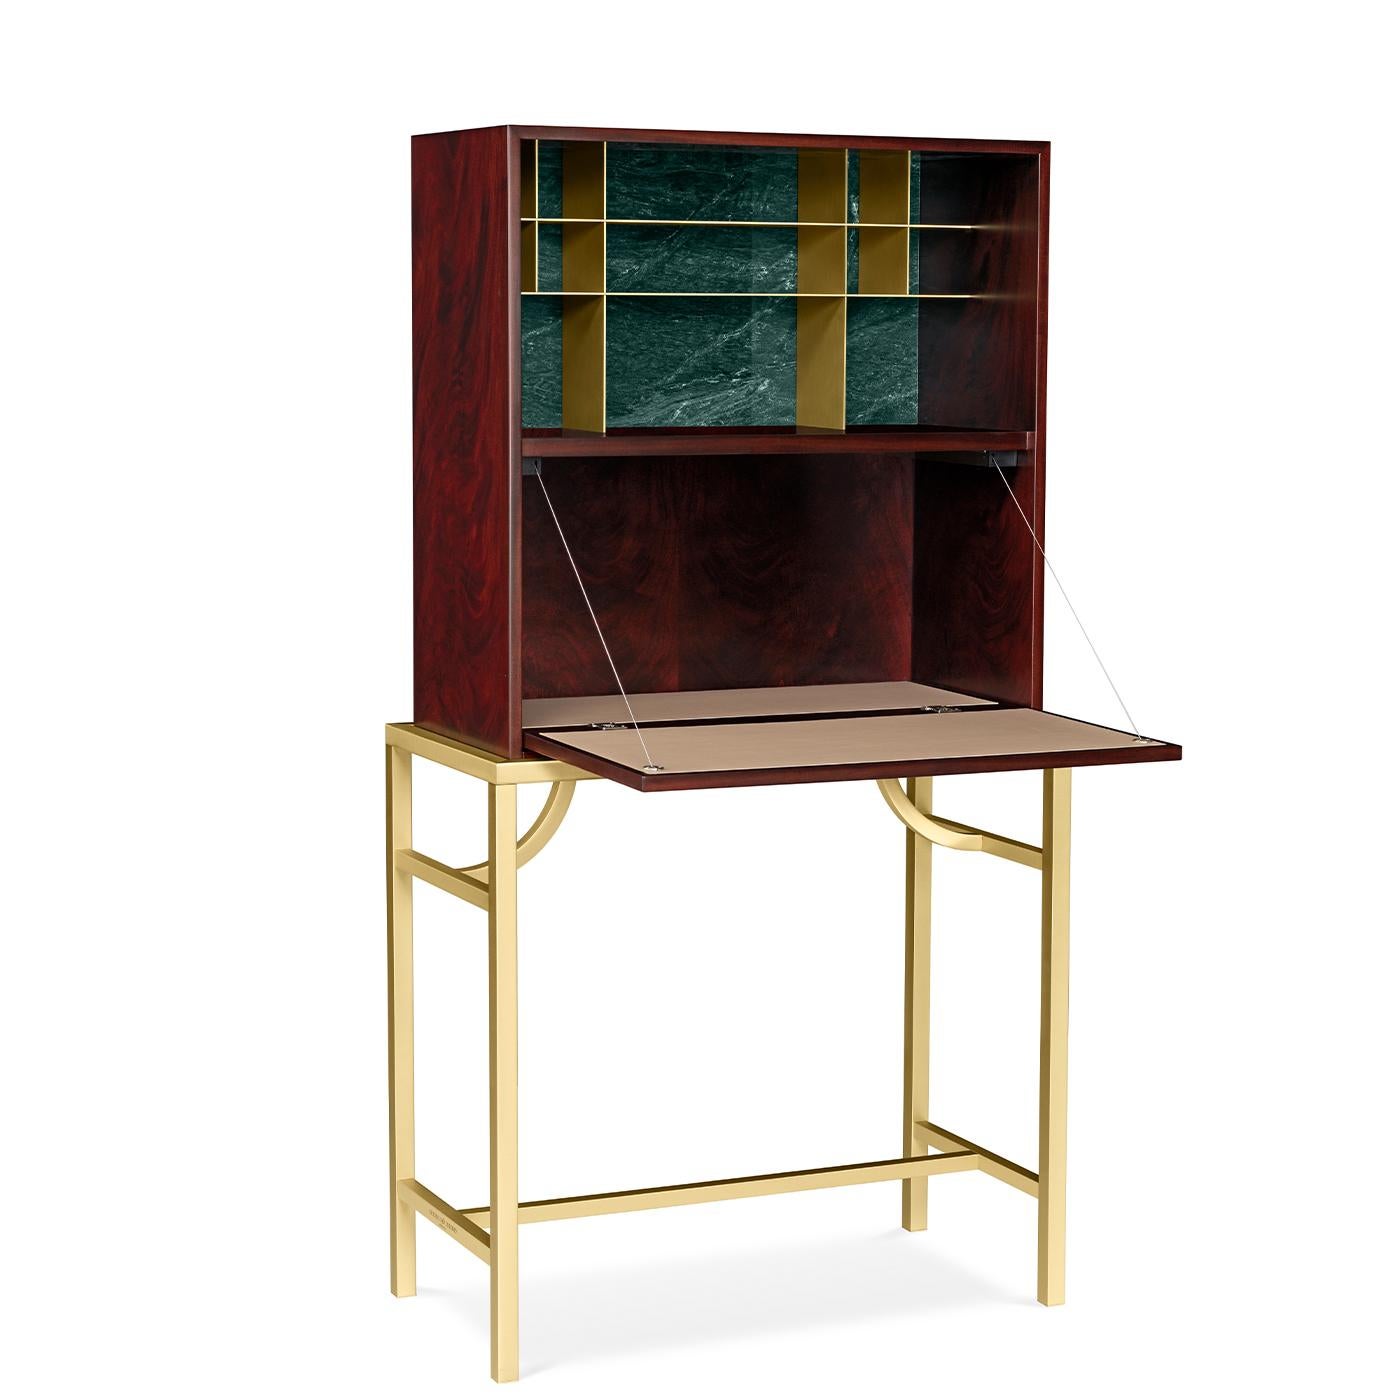 A superlative showcase of craftsmanship, this cabinet can be used as bar cabinet, jewelry chest, or wunderkabinett to display elegant and precious accent pieces. A sleek and modern design of Japanese inspiration, it rests on brass legs boasting a